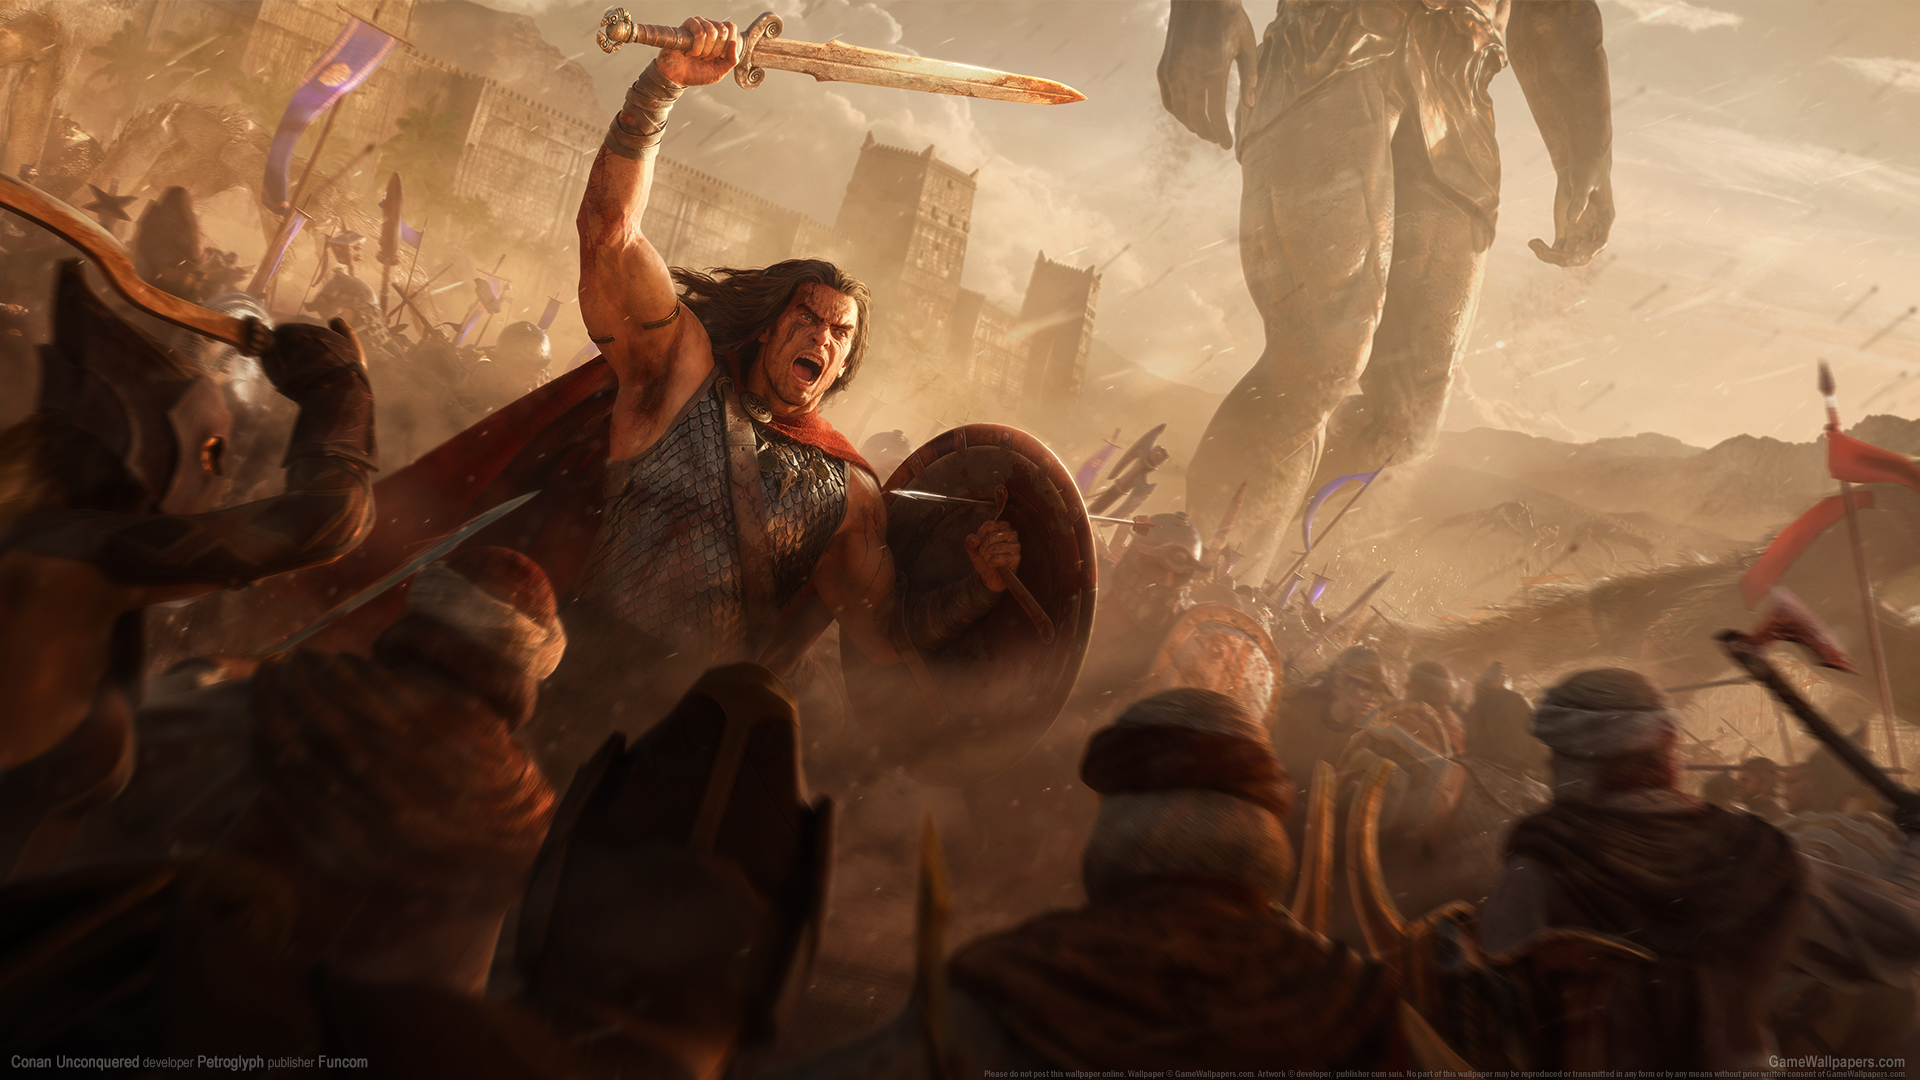 Conan Unconquered 1920x1080 wallpaper or background 01